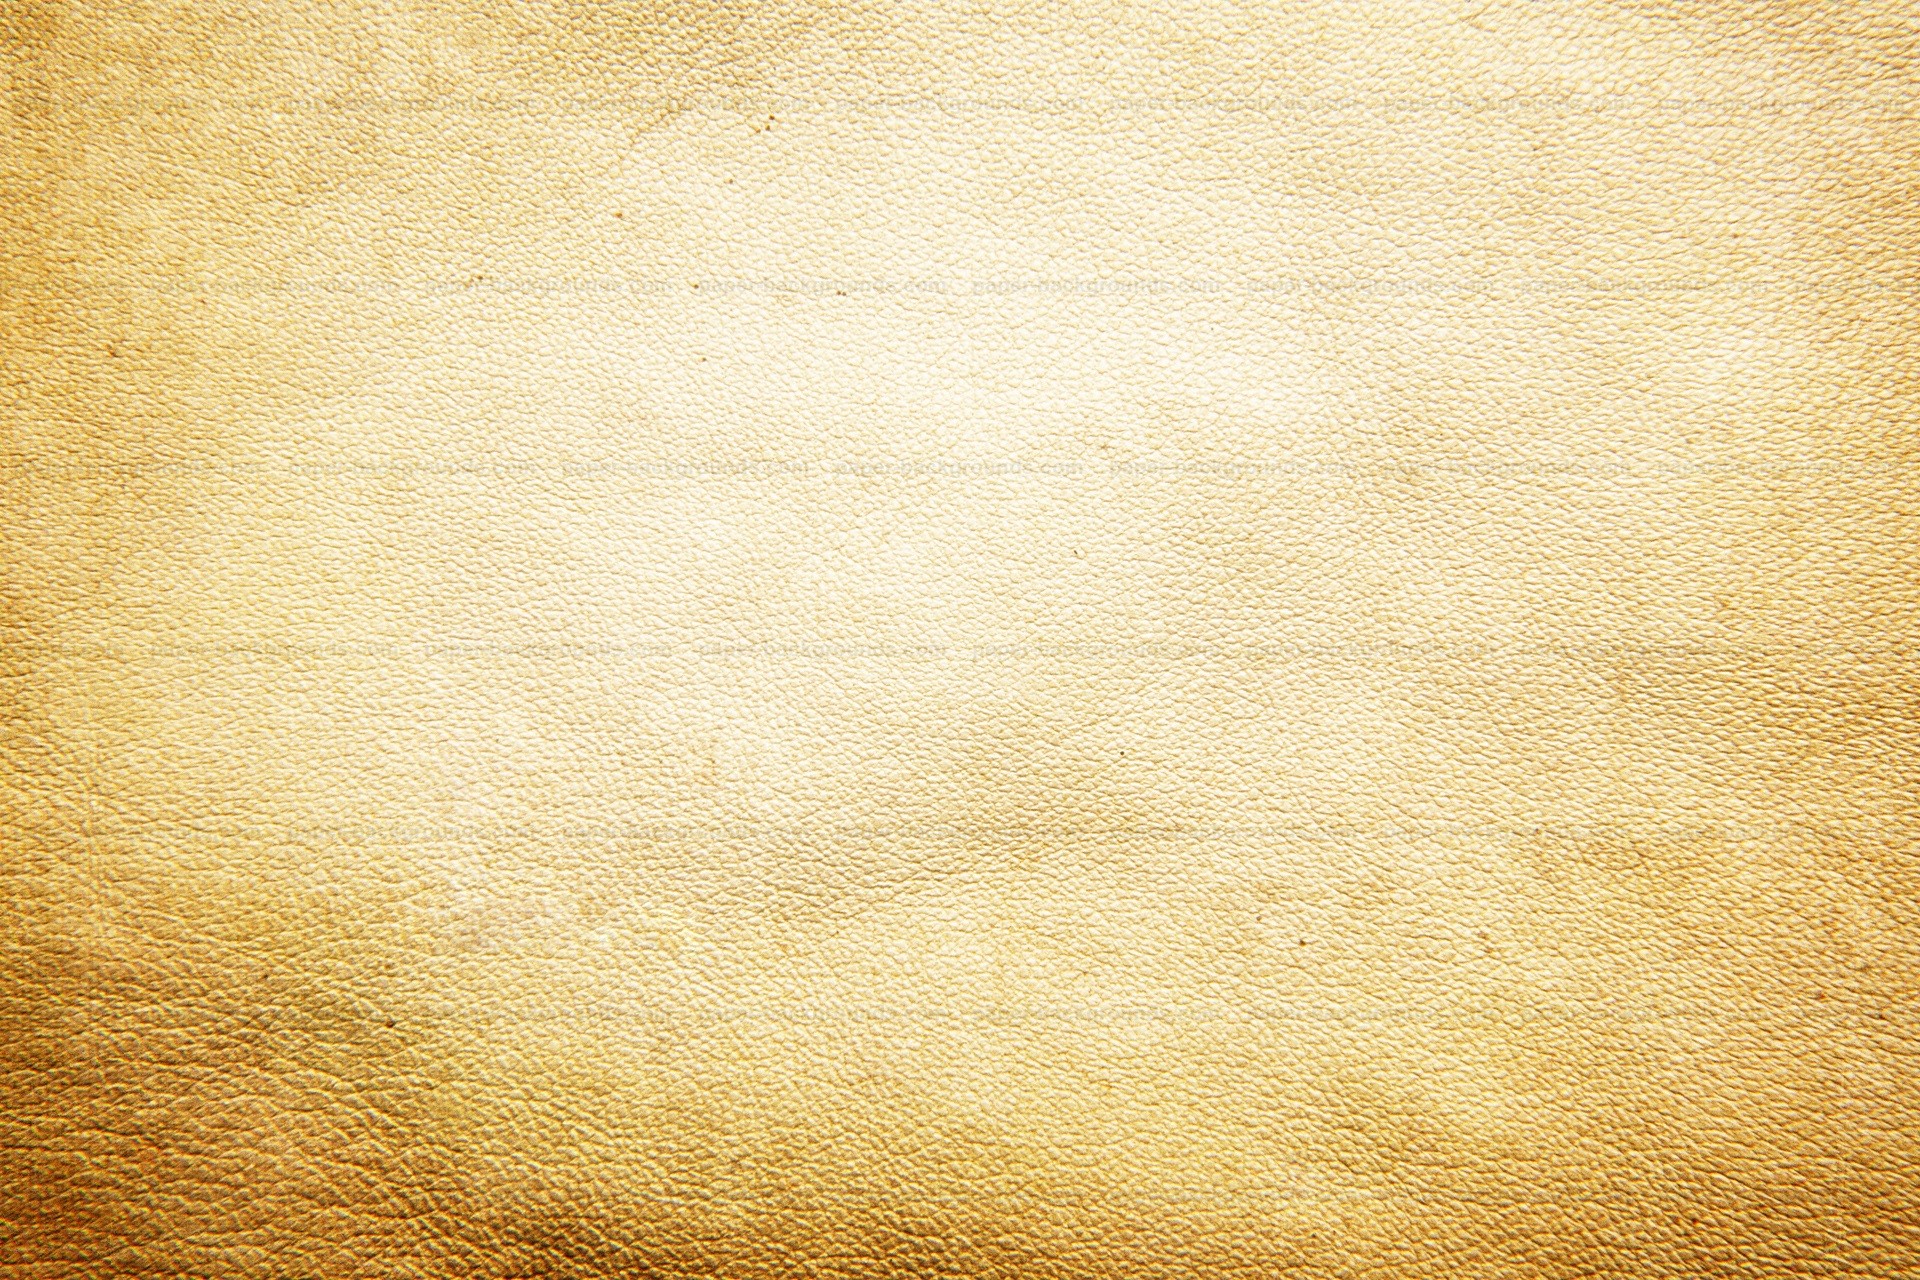 1920x1280 Paper Backgrounds | real | Royalty Free HD Paper Backgrounds